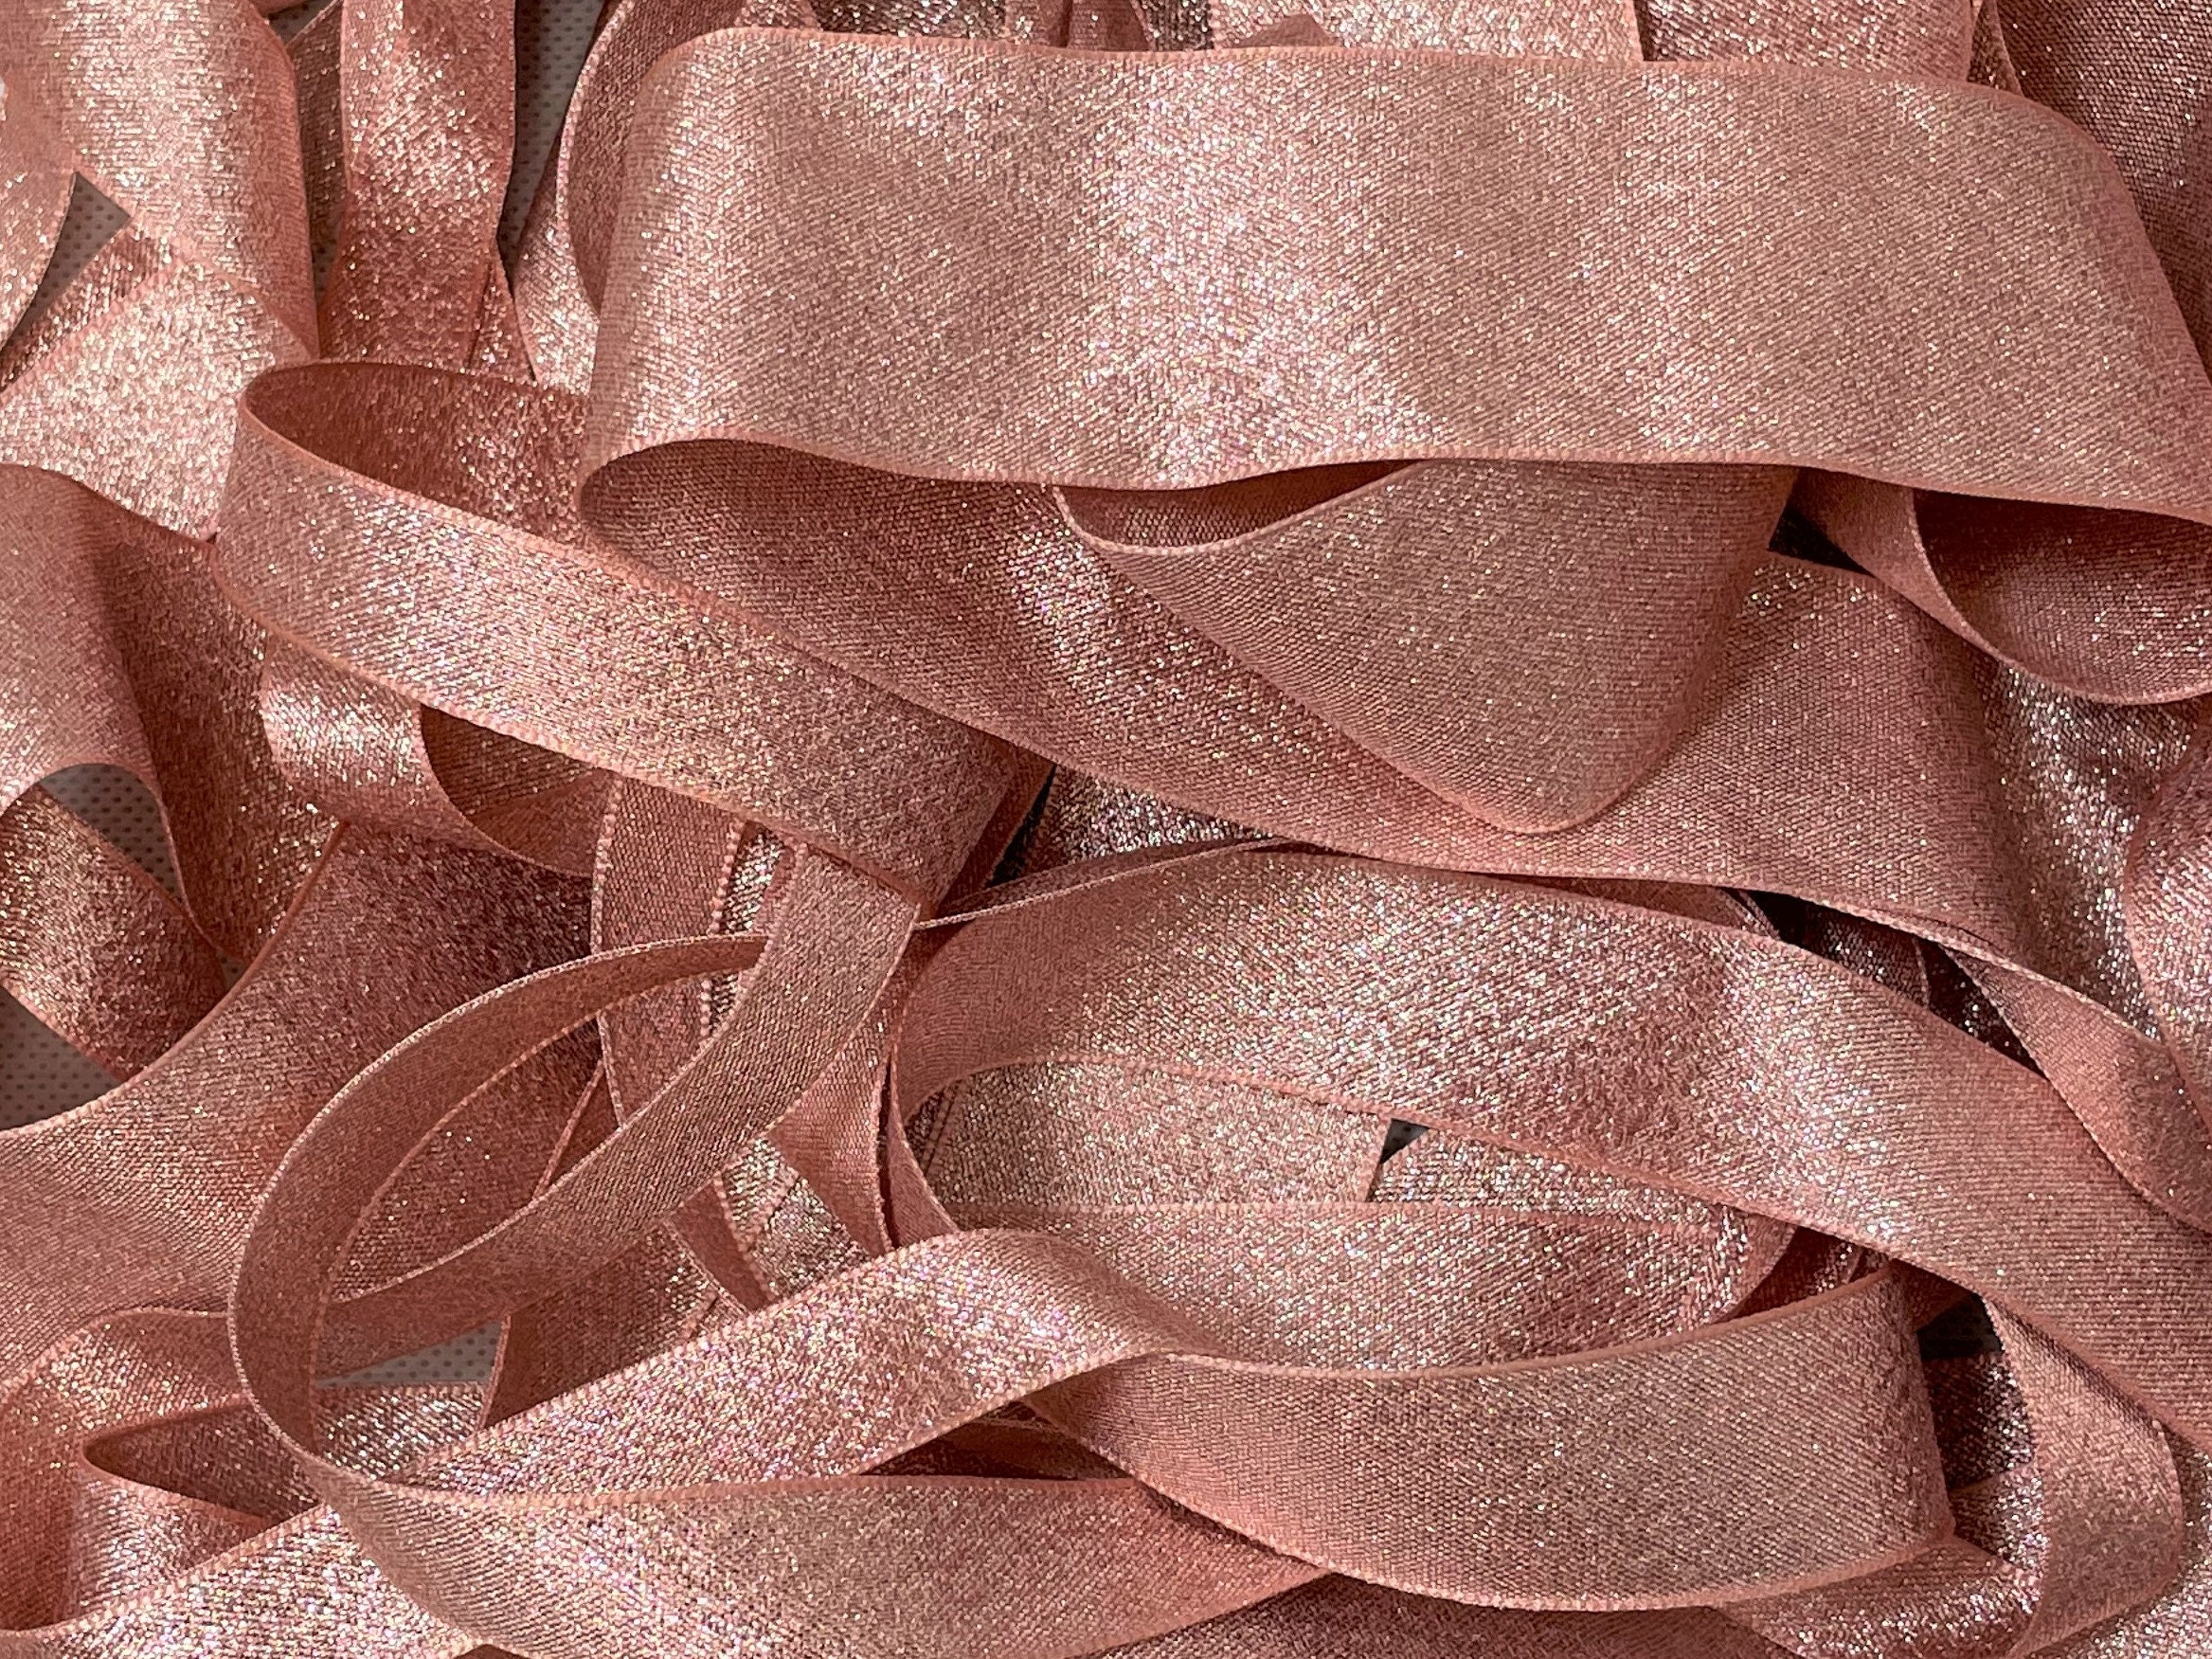  Rose Gold Glitter Ribbon 1 Inch x 25 Yards, Sparkly Metallic  Fabric Ribbons, Sparkly Rose Gold Ribbon for Gift Wrapping, DIY Crafts,  Floral Bouquets, Birthday, Wedding Party and Home Decorations